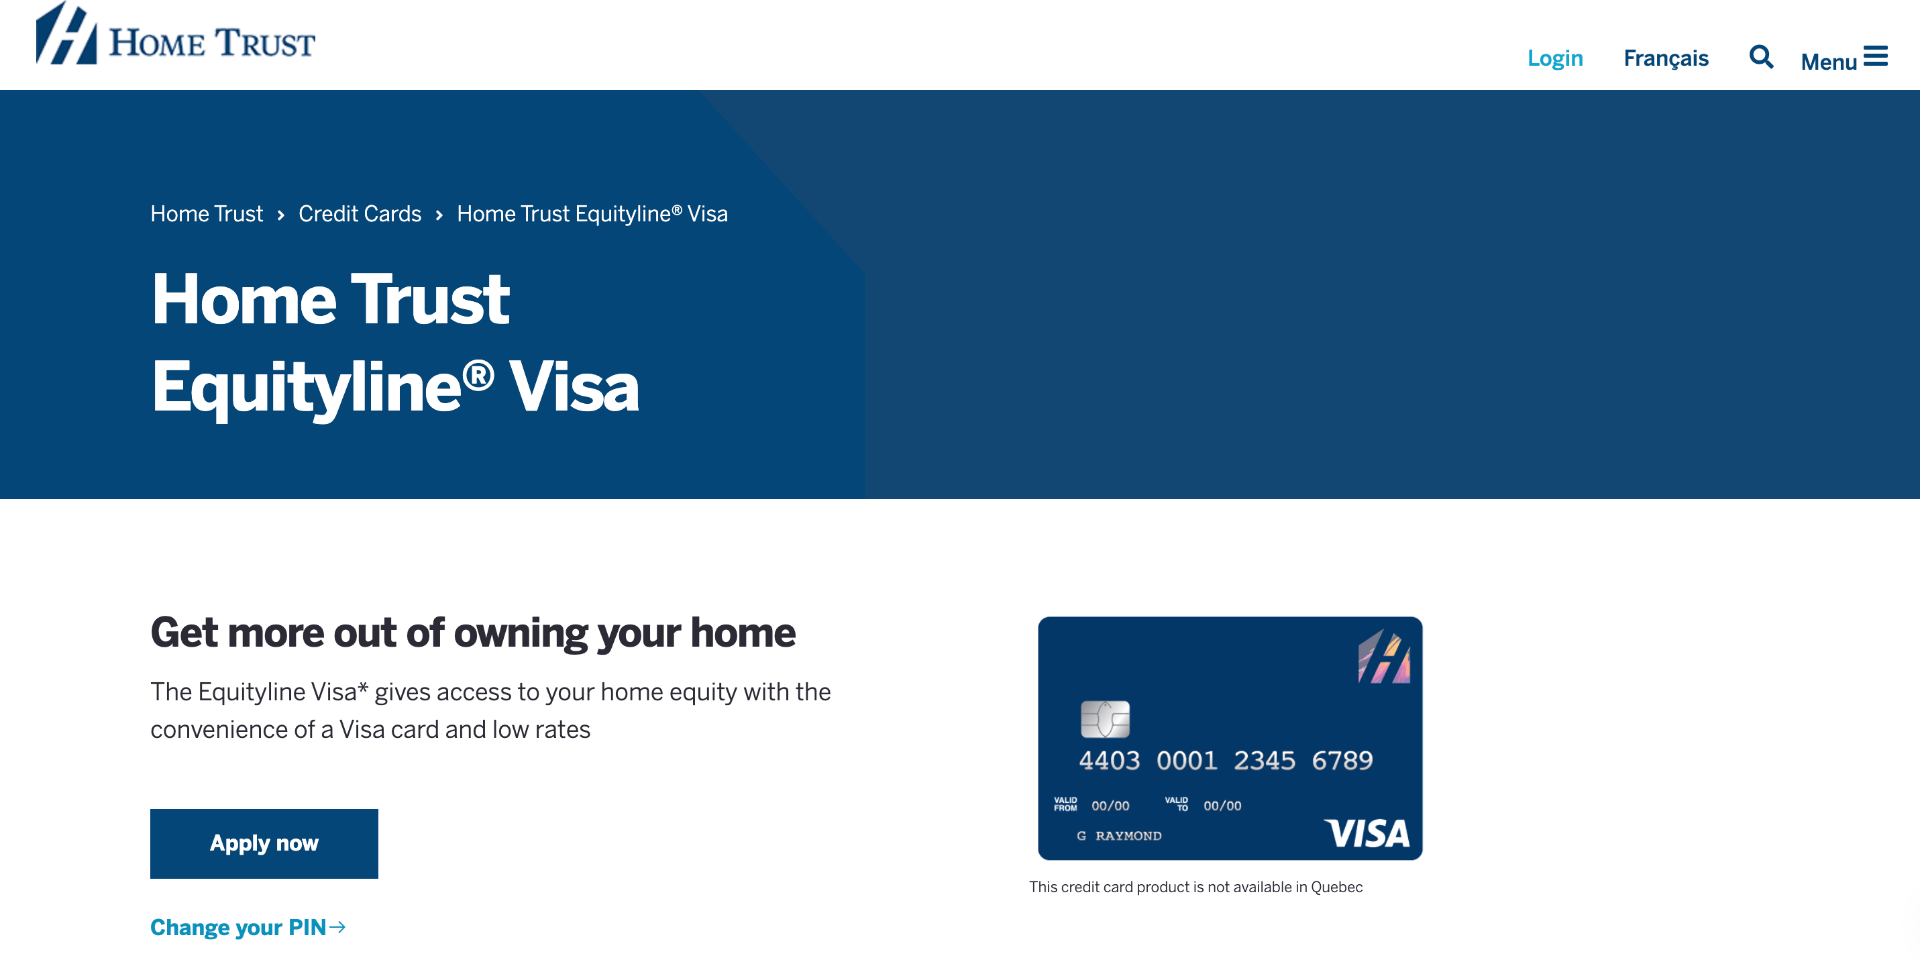 Home Trust Credit Card - Learn How to Apply